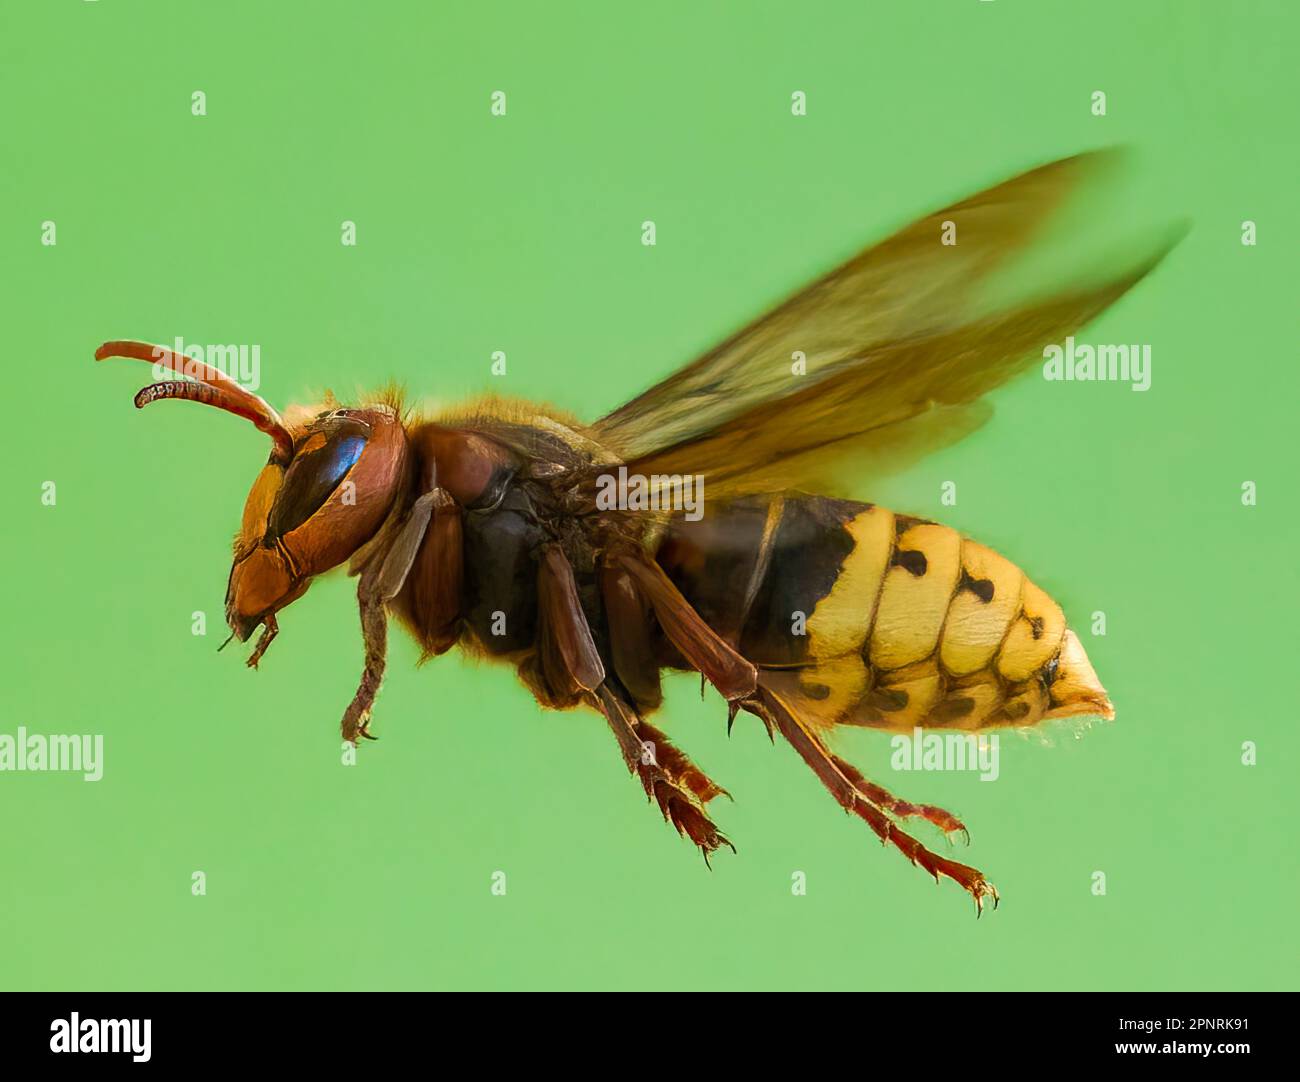 Close-up view of live European hornet in flight Vespa crabro-the largest eusocial wasp native to Europe Stock Photo